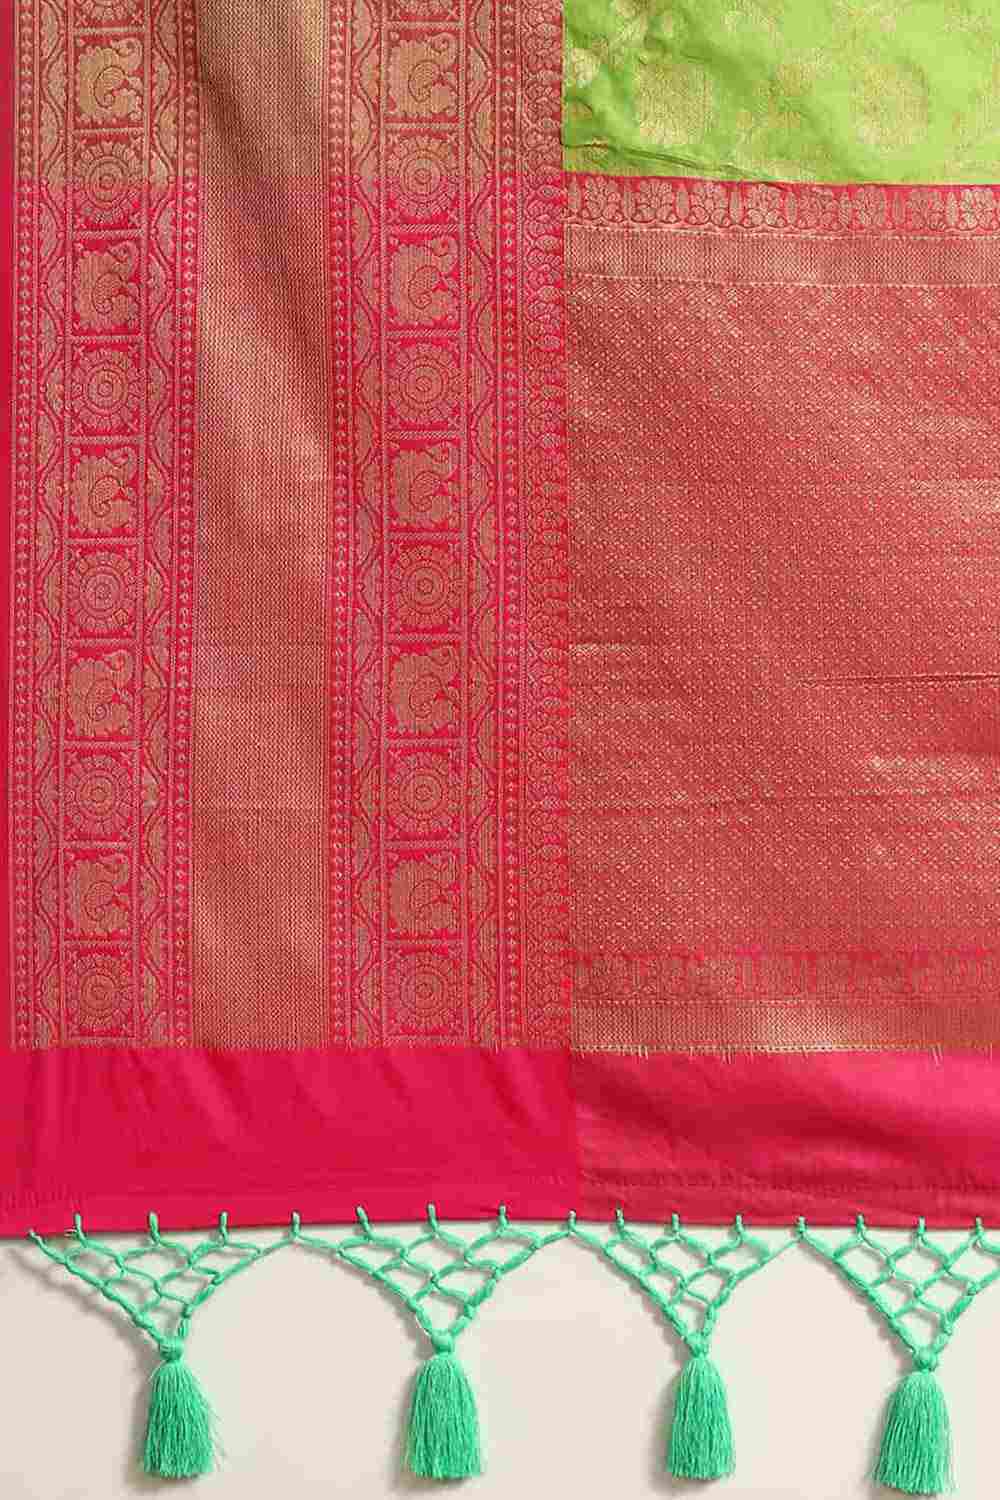 Buy Parrot Green Art Silk floral brocade Saree Online - Zoom Out 